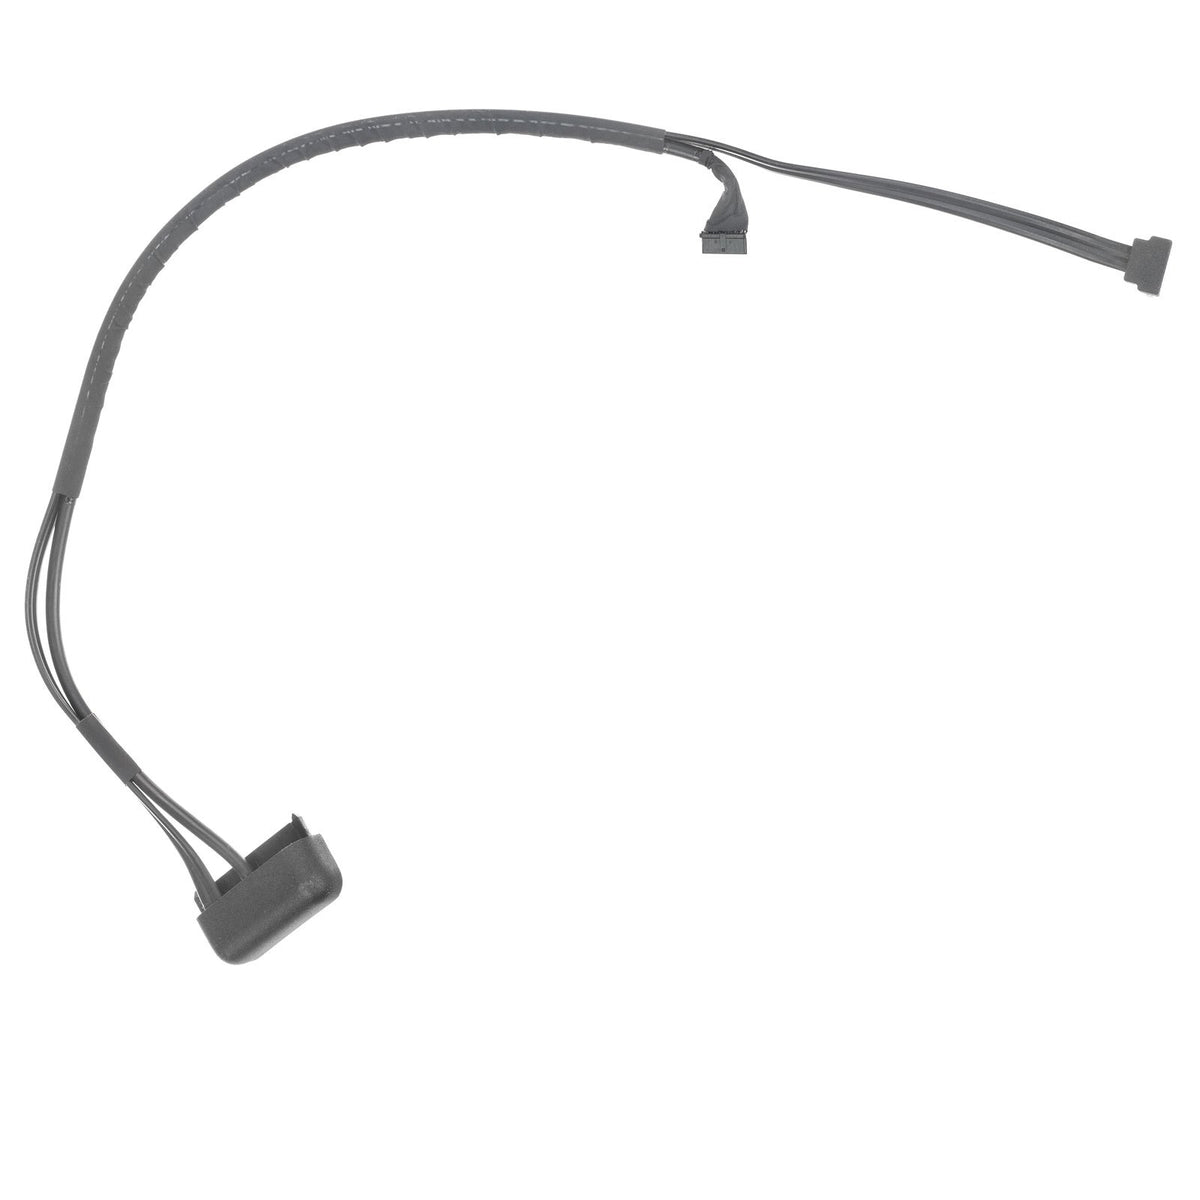 HARD DRIVE CABLE FOR IMAC 27" A1419 (LATE 2012)